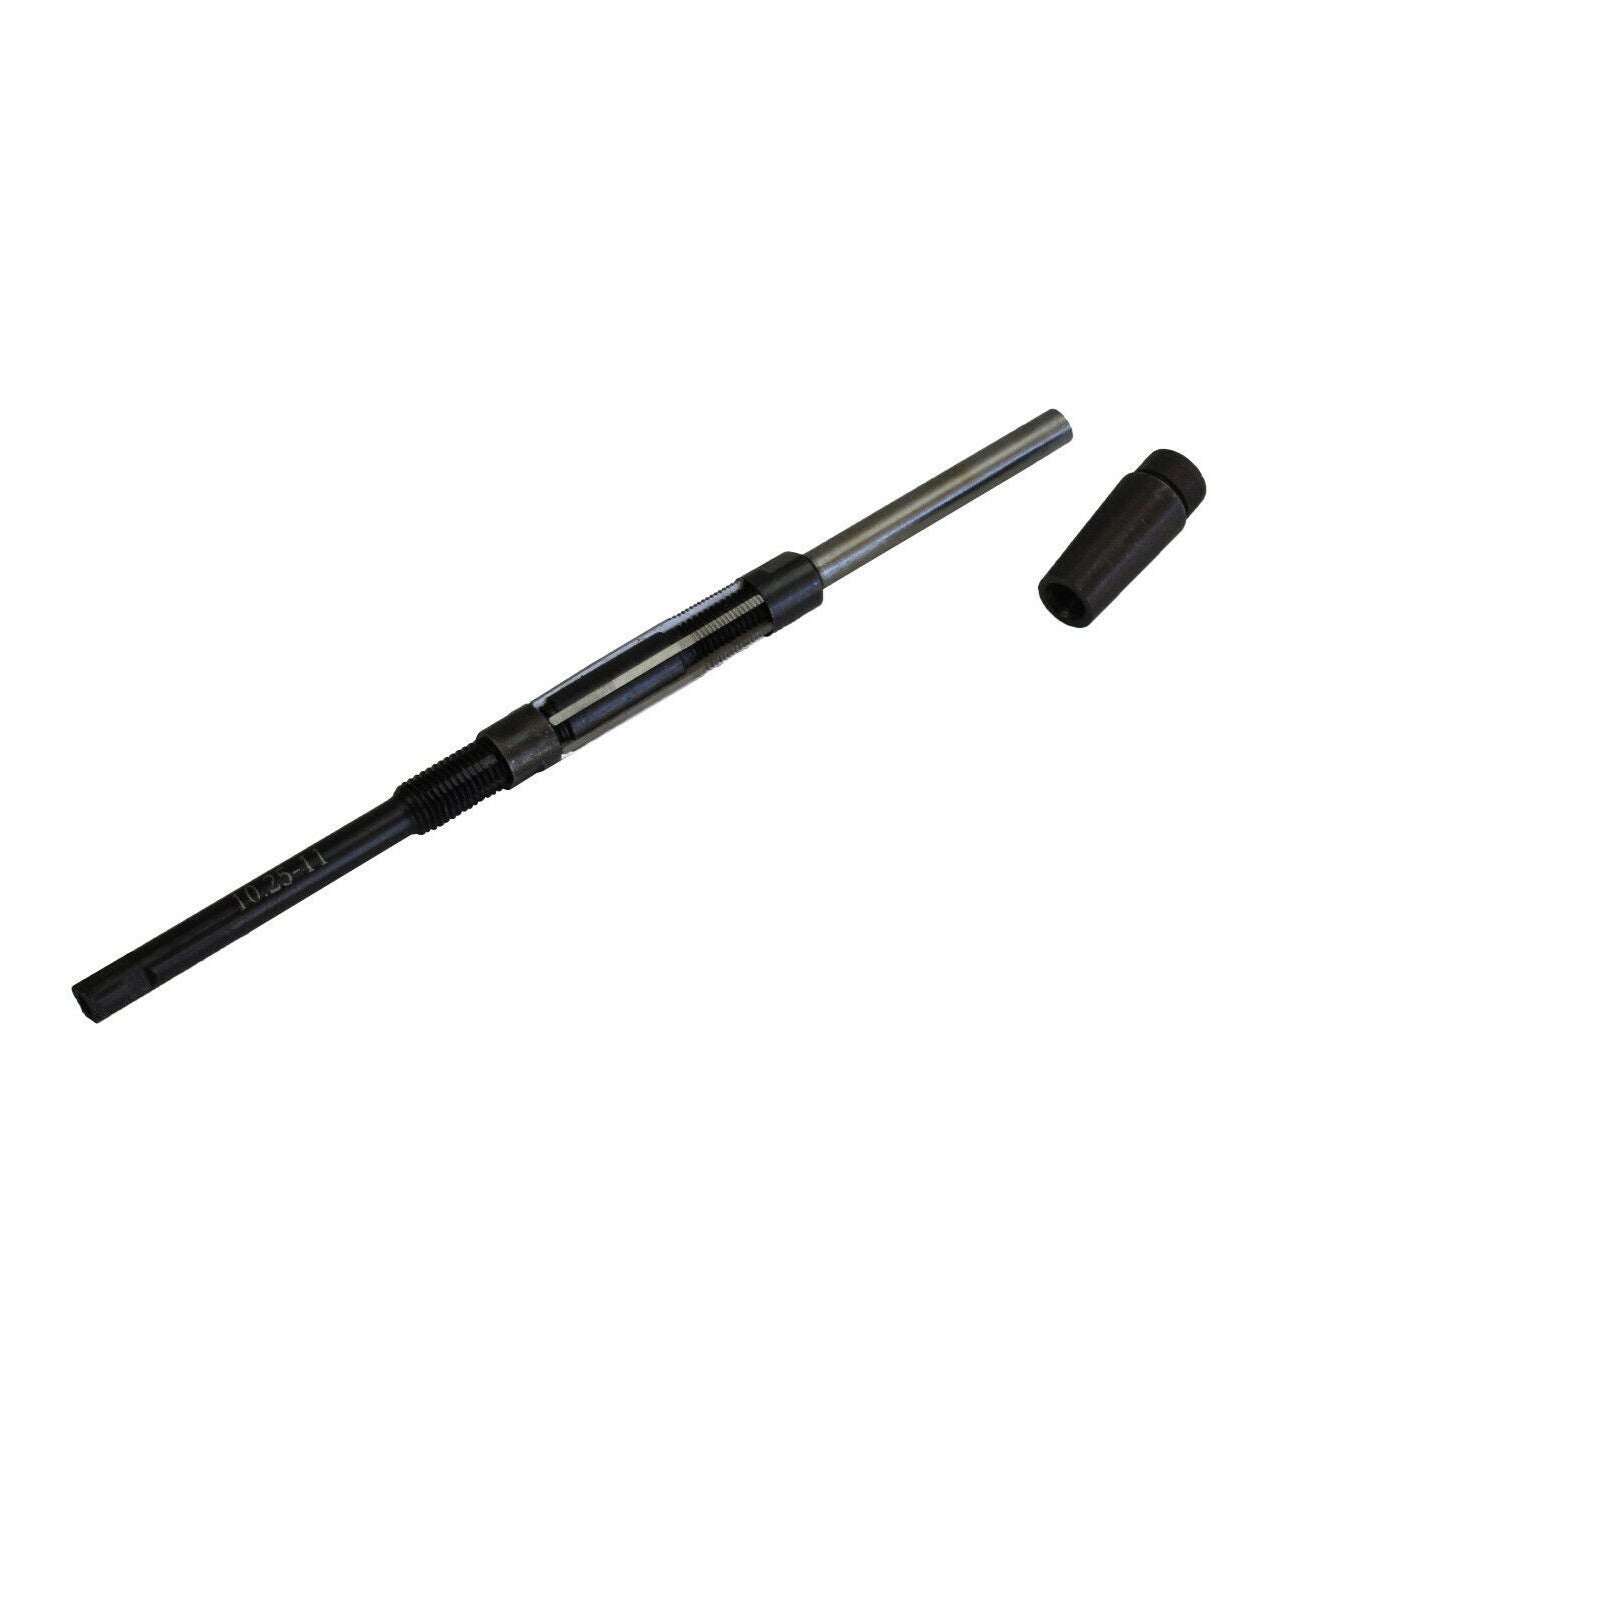 10.25 -11 mm Adjustable Hand Reamer with Guide